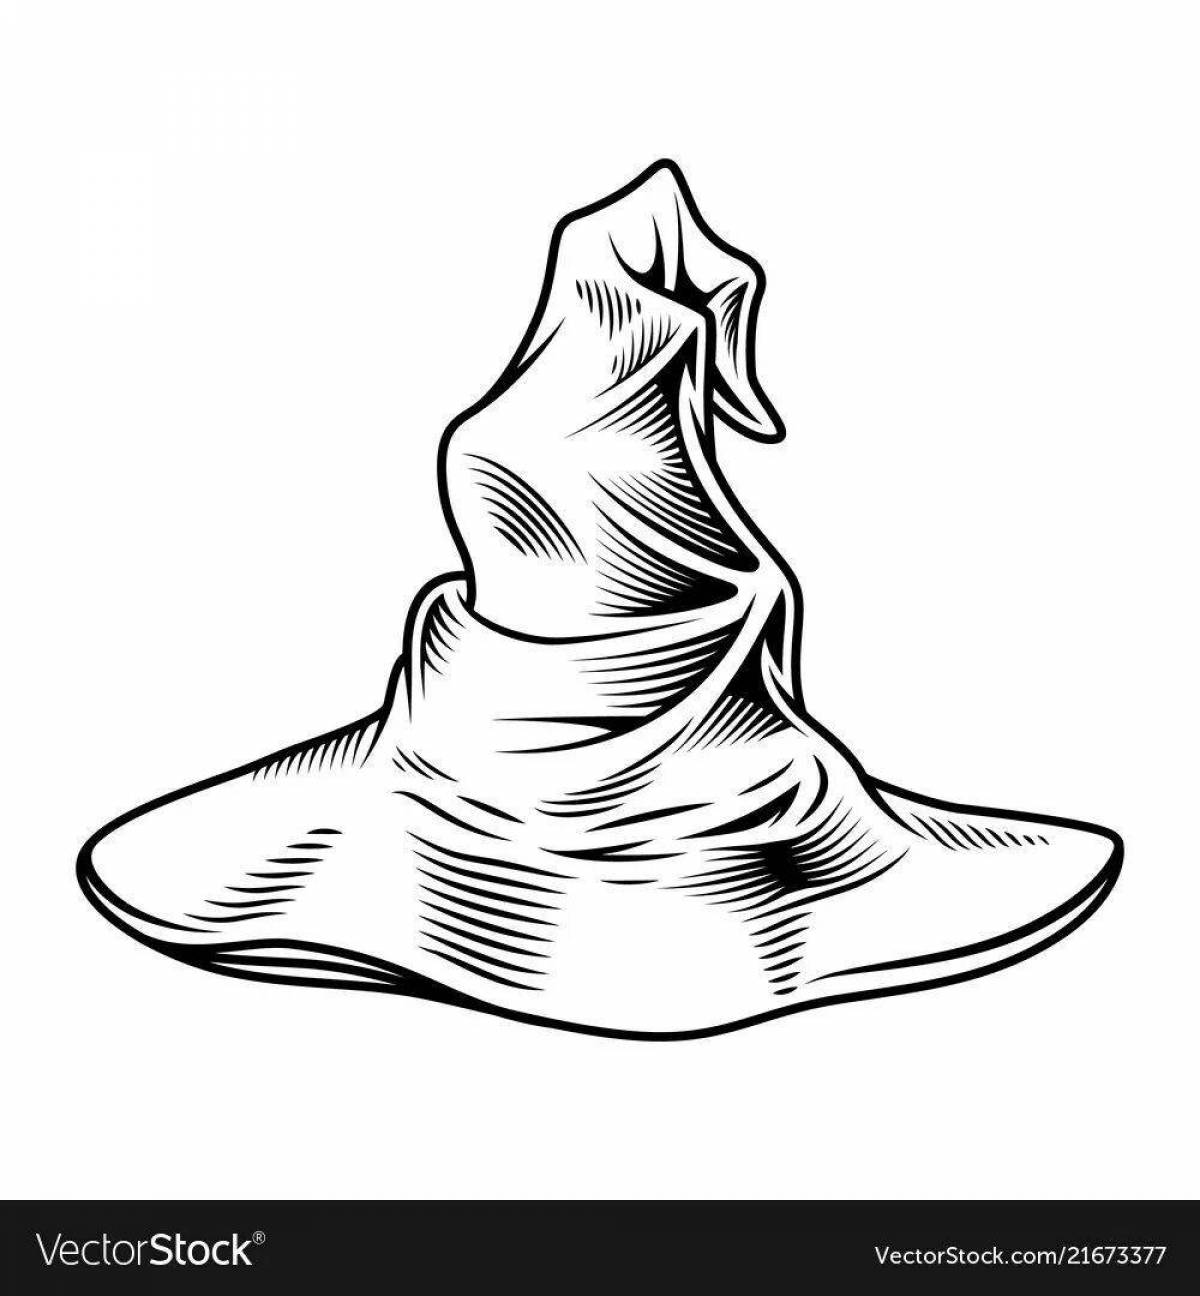 Colouring awesome wizard hat